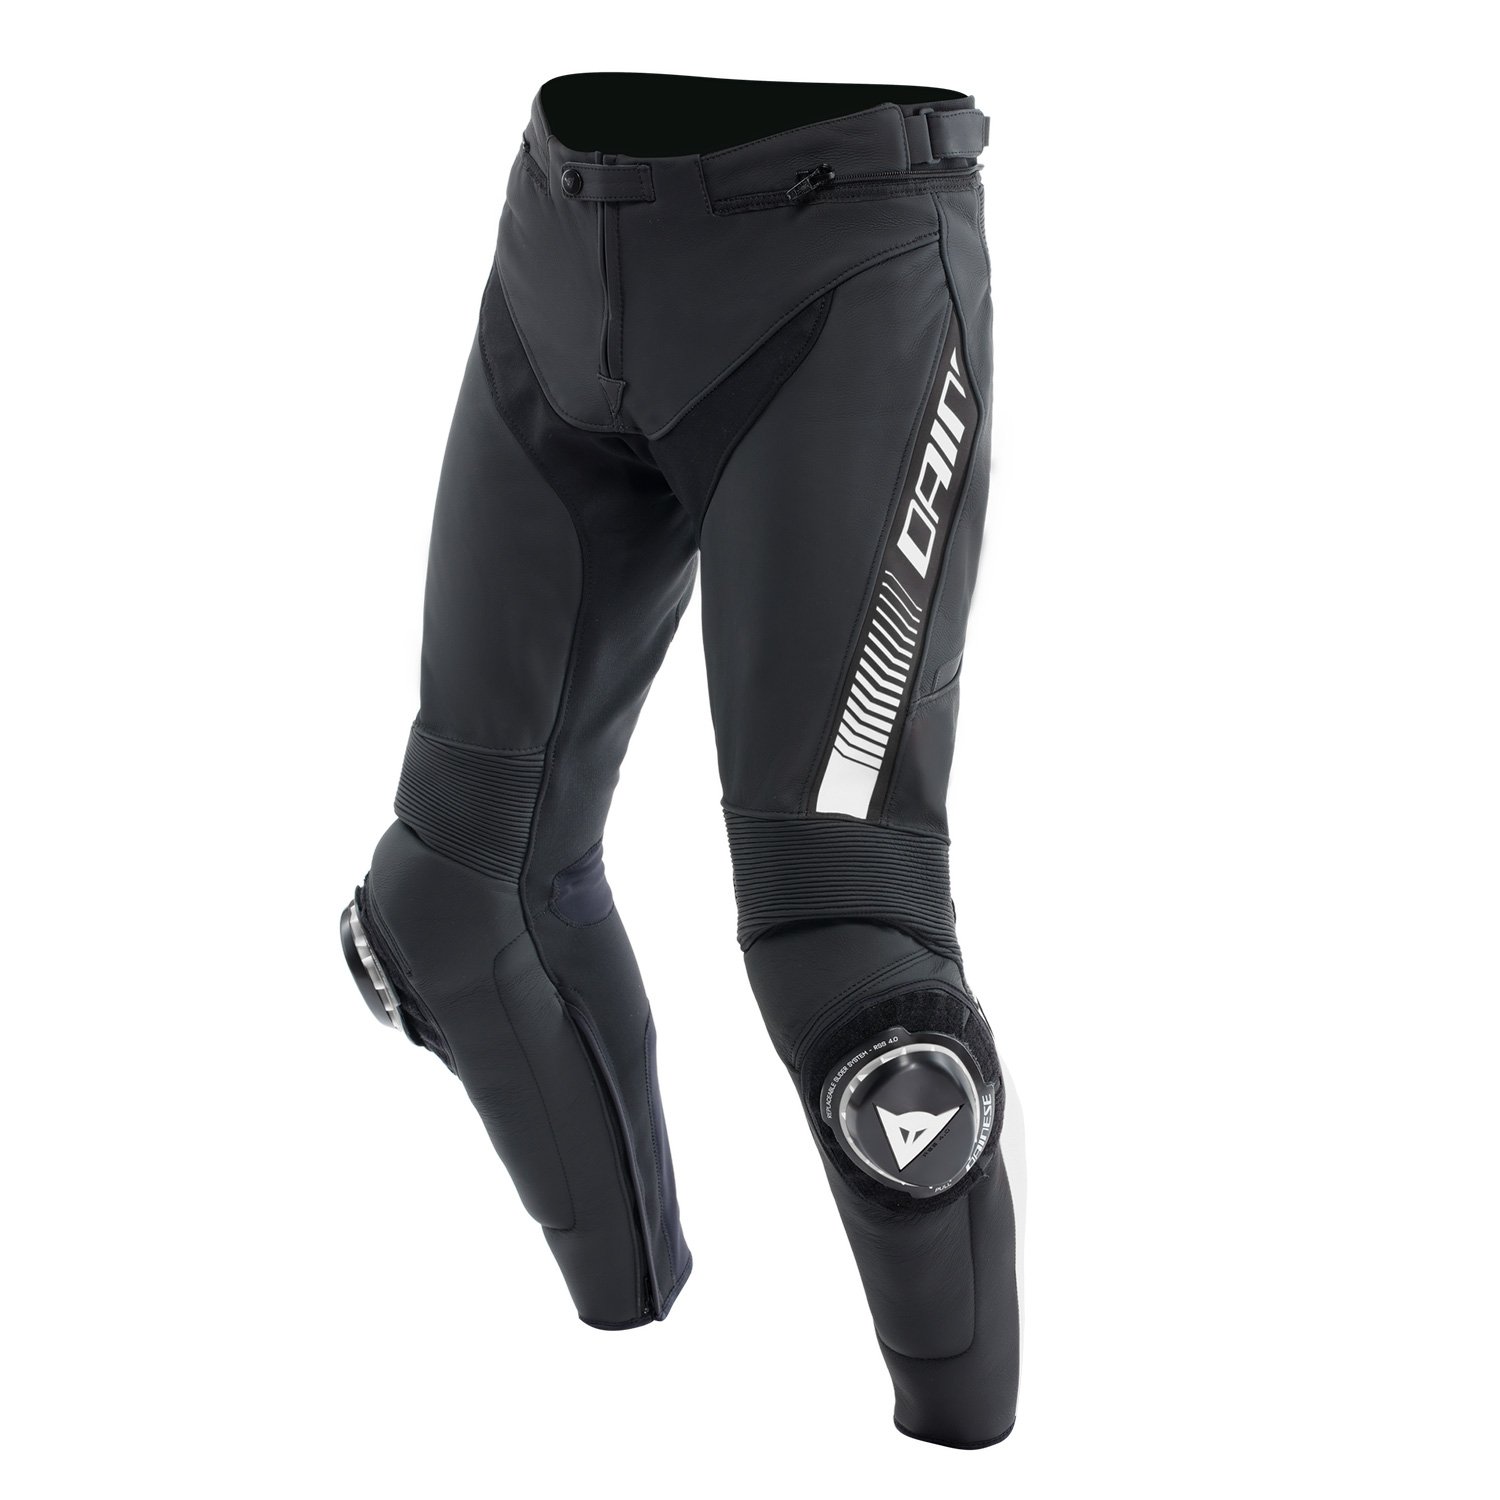 Image of Dainese Super Speed Leather Pants Black White Talla 46